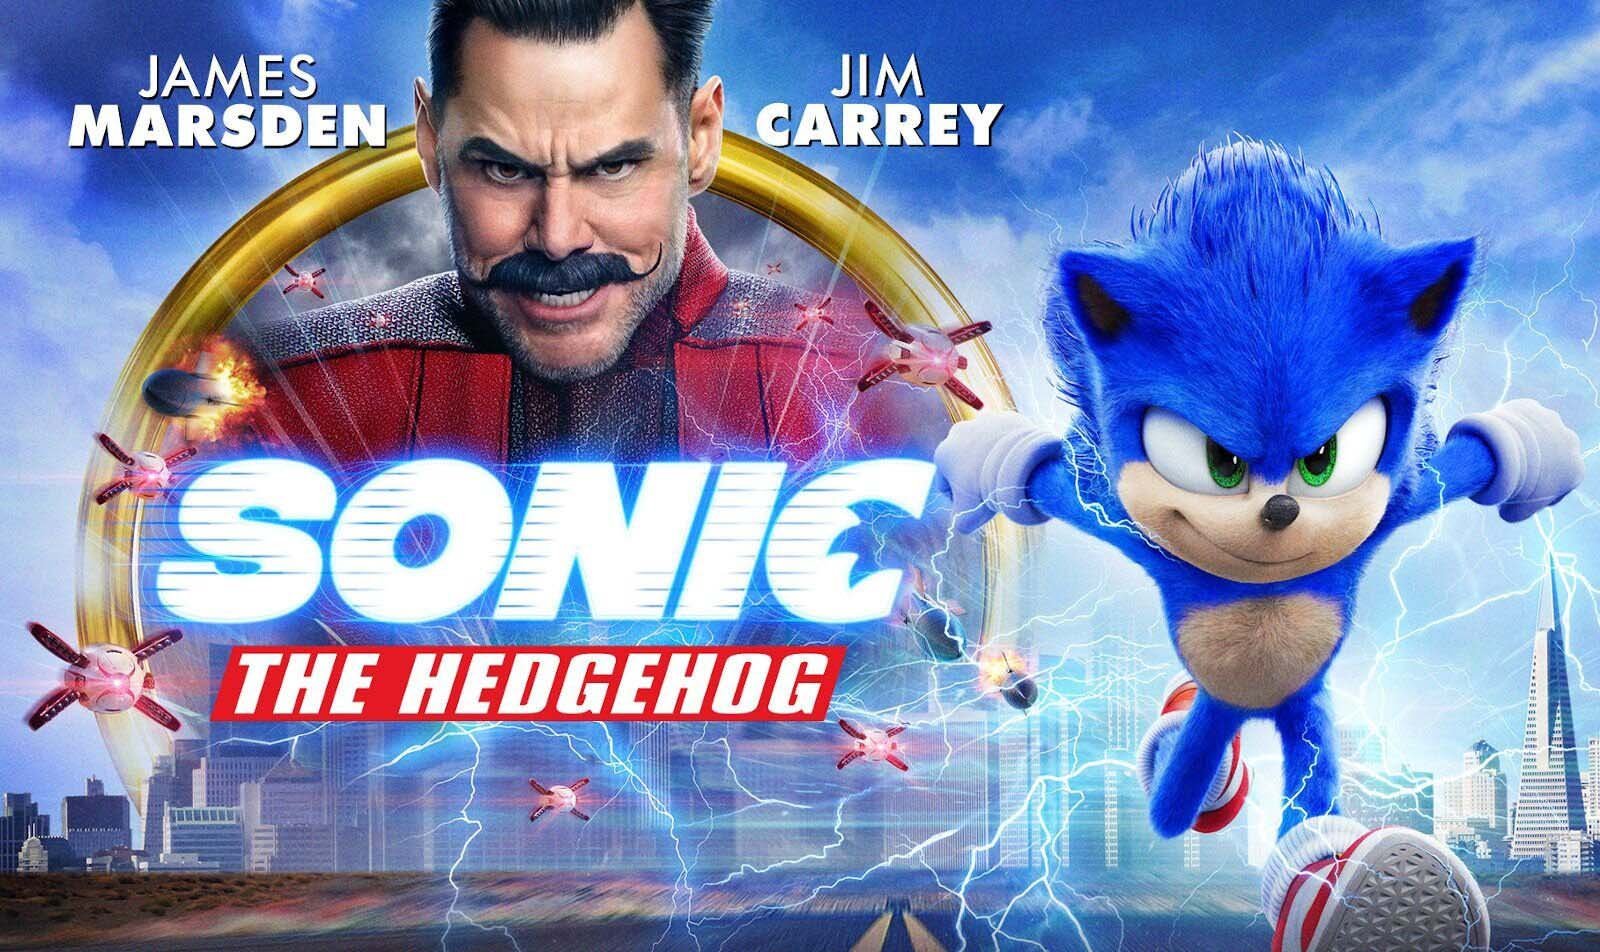 Poster for 'Sonic' movie.